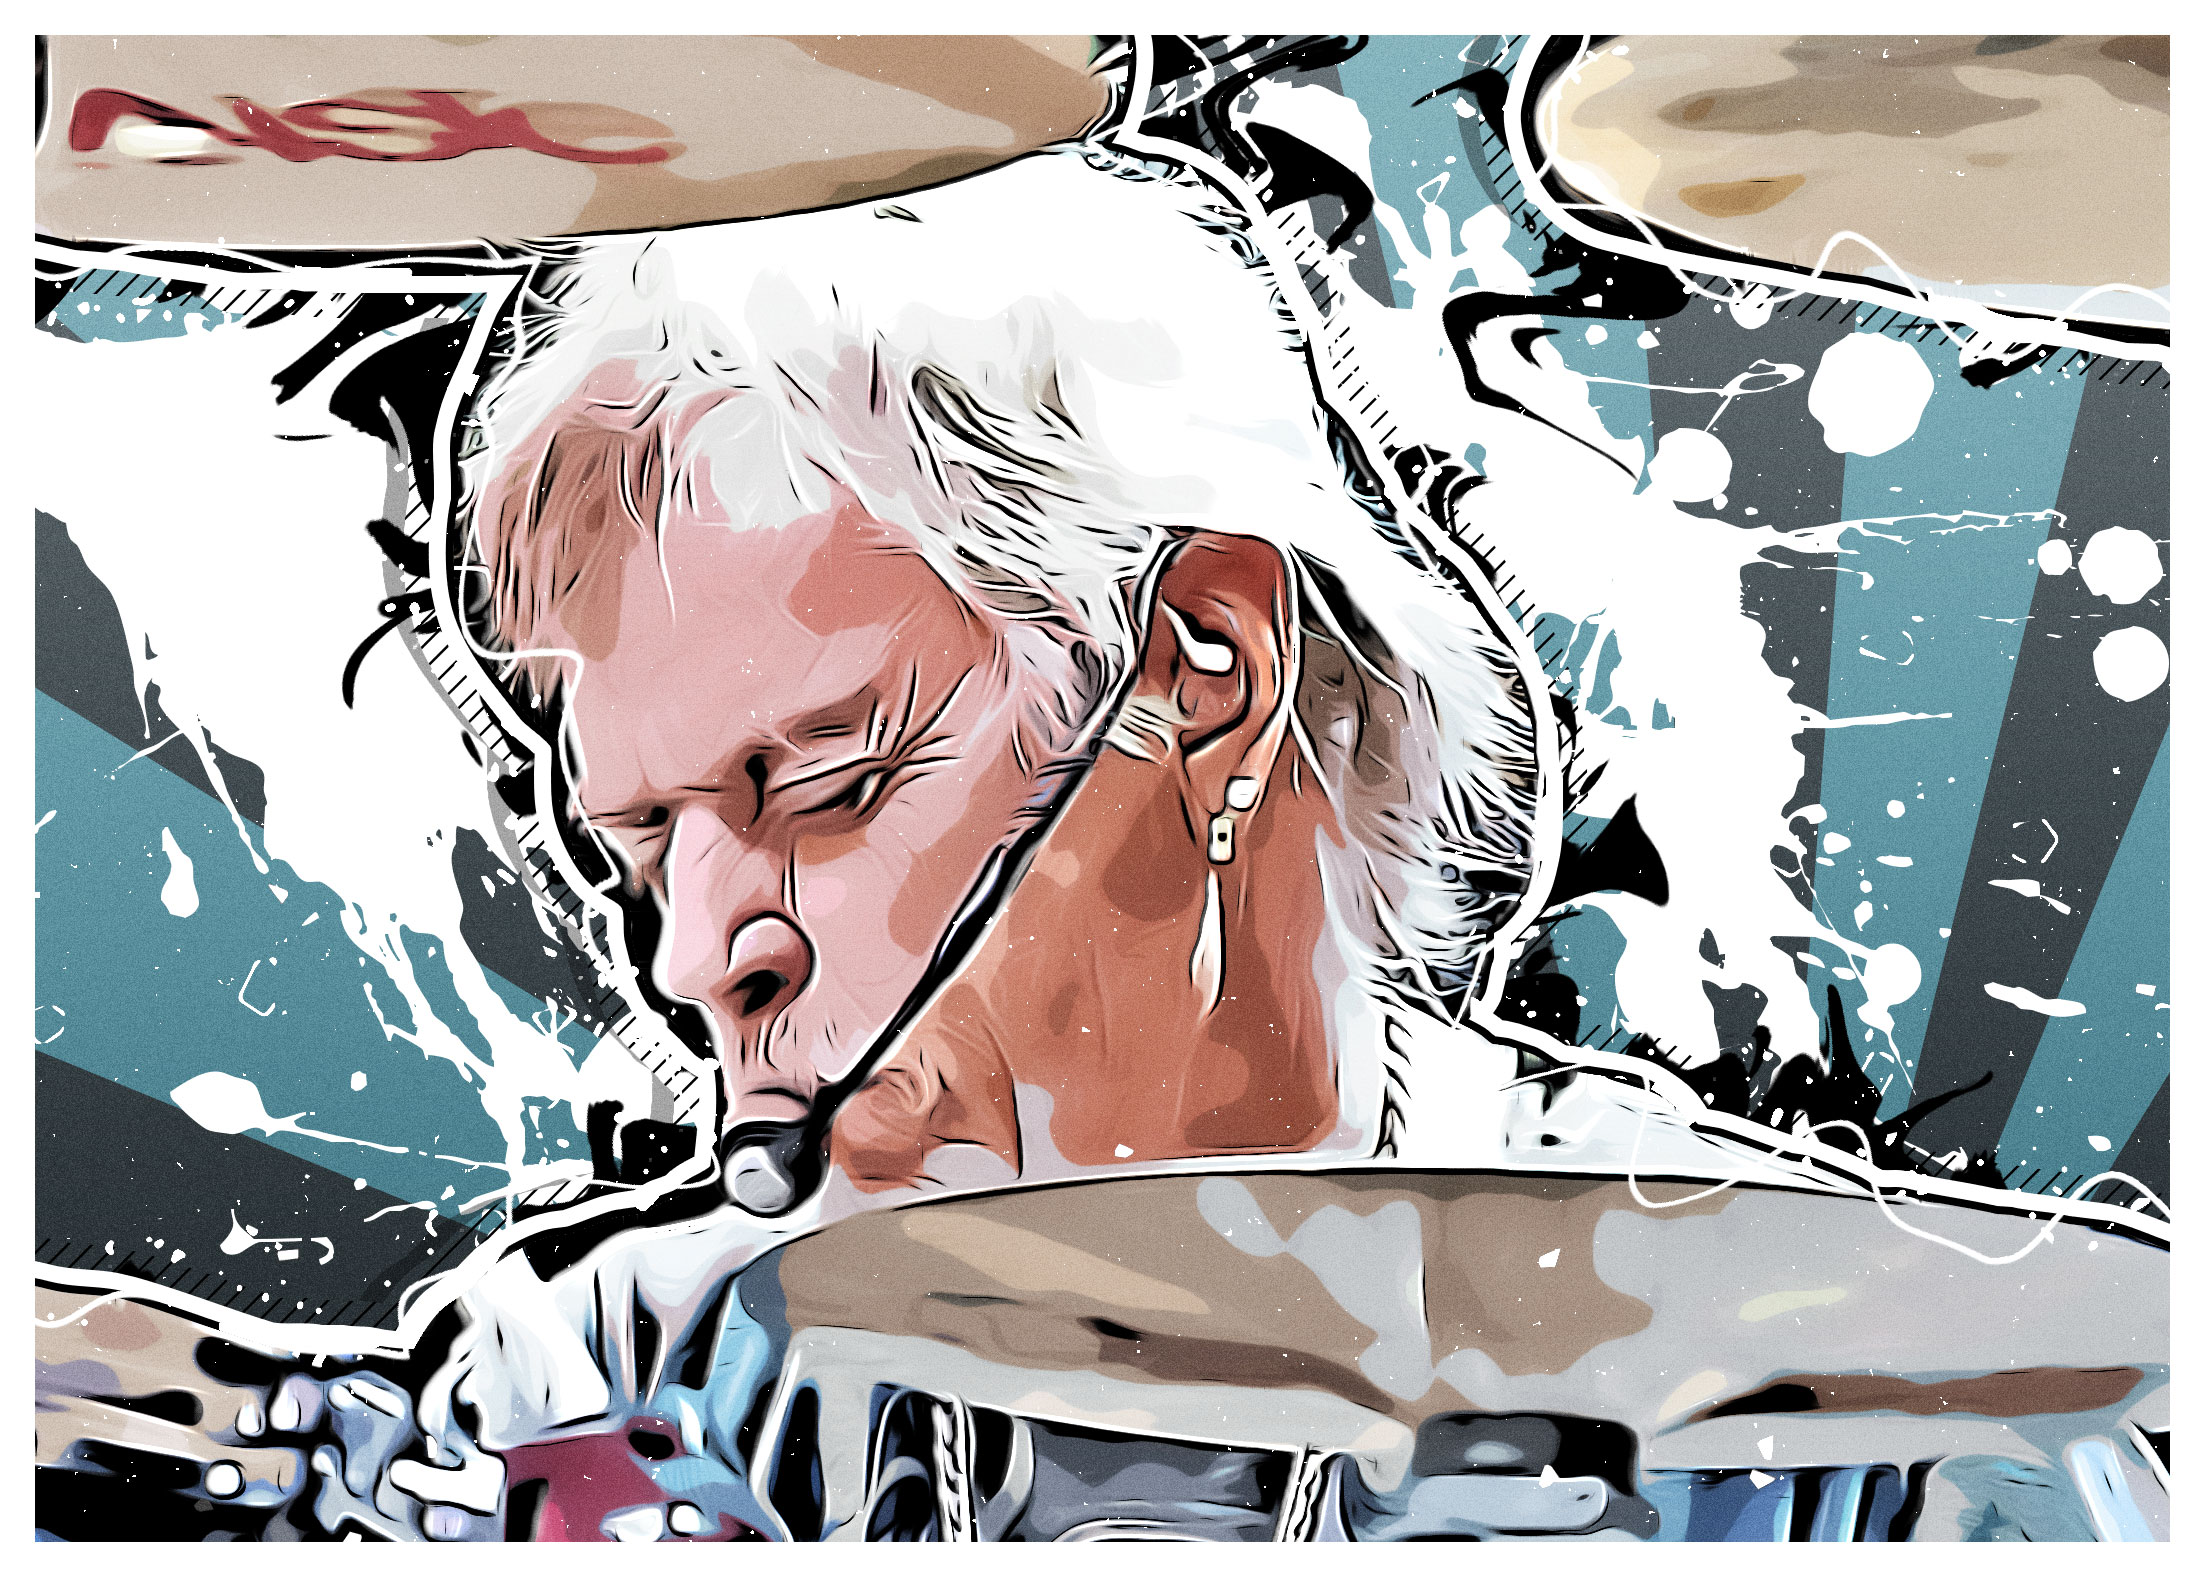 A stylized image of rock musician Frank Beard playing the drums.